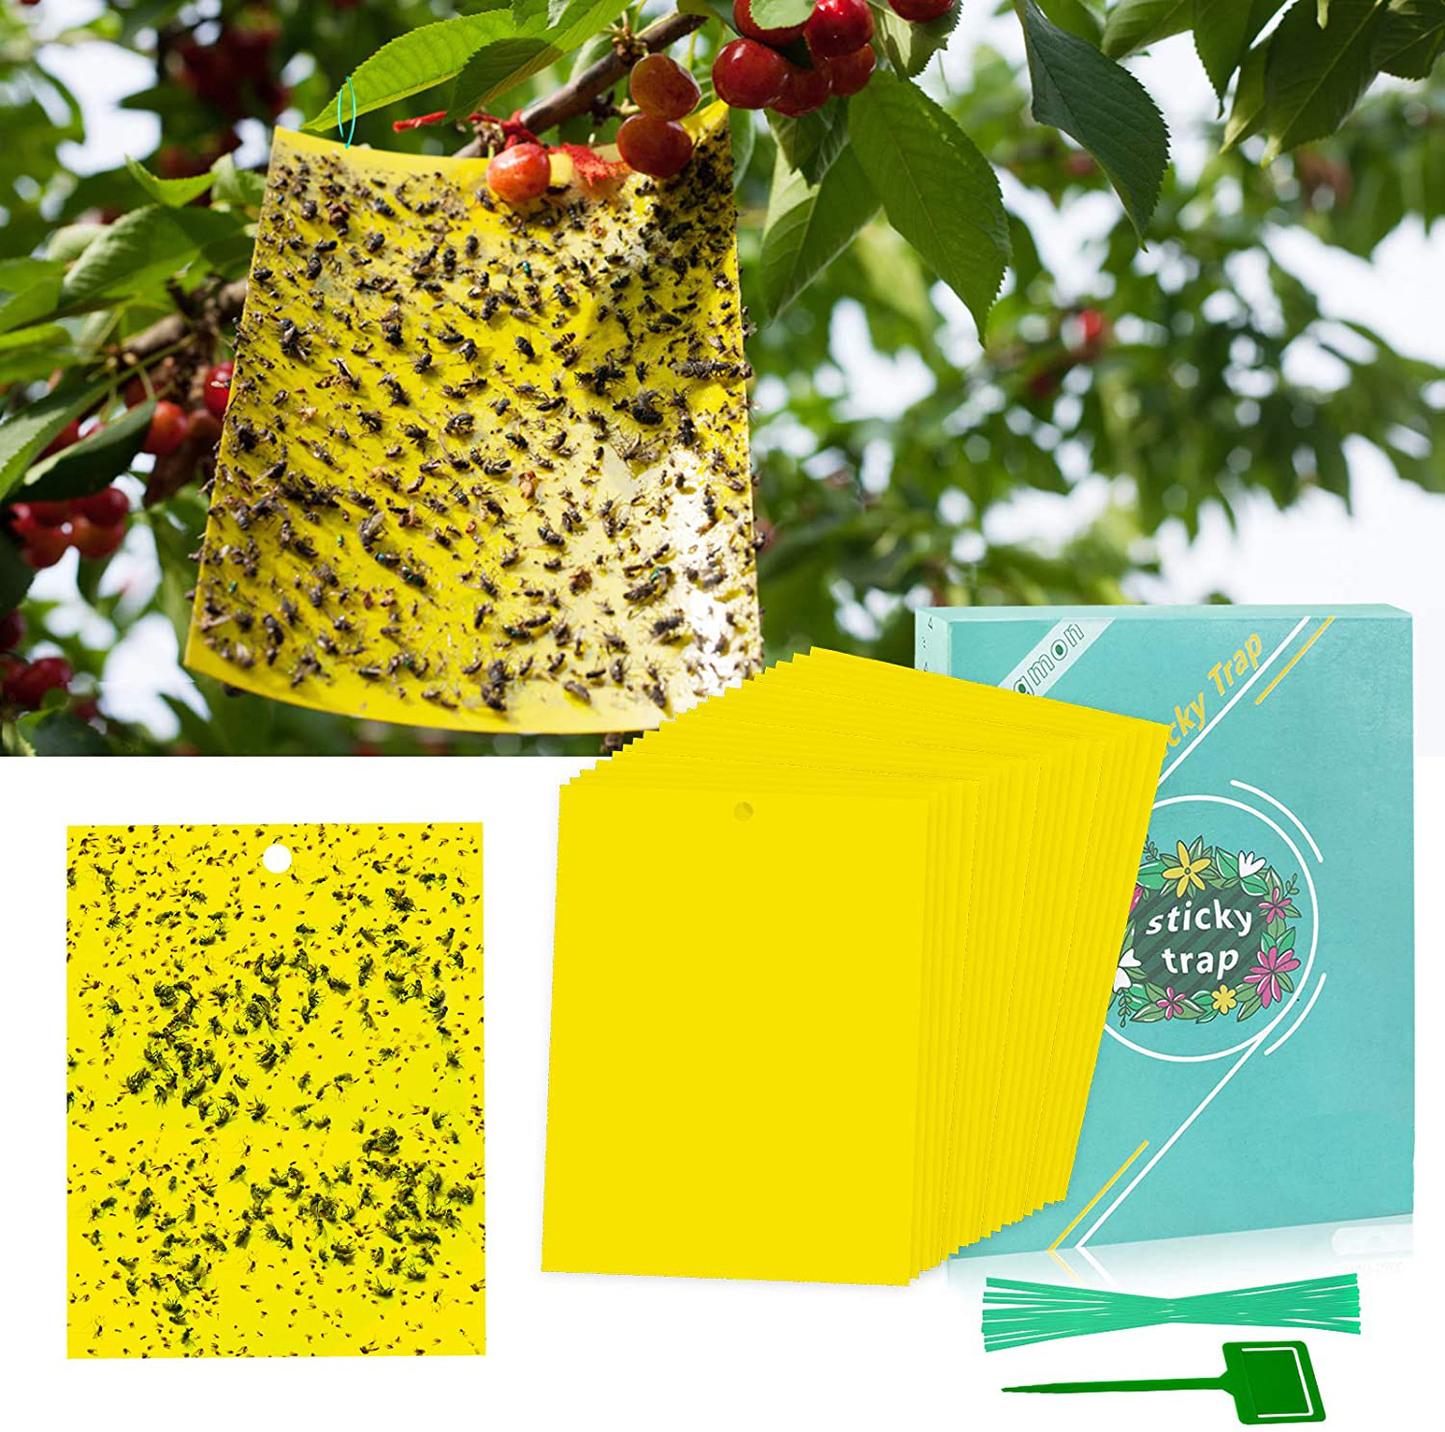 48 Pcs Gnat Trap, Fruit Fly Sticky Traps for Indoor/Outdoor to Use, Insect Catcher for Flying Plant Insect Such as Mosquitos, Fungus Gnats, Aphids, Leafminers